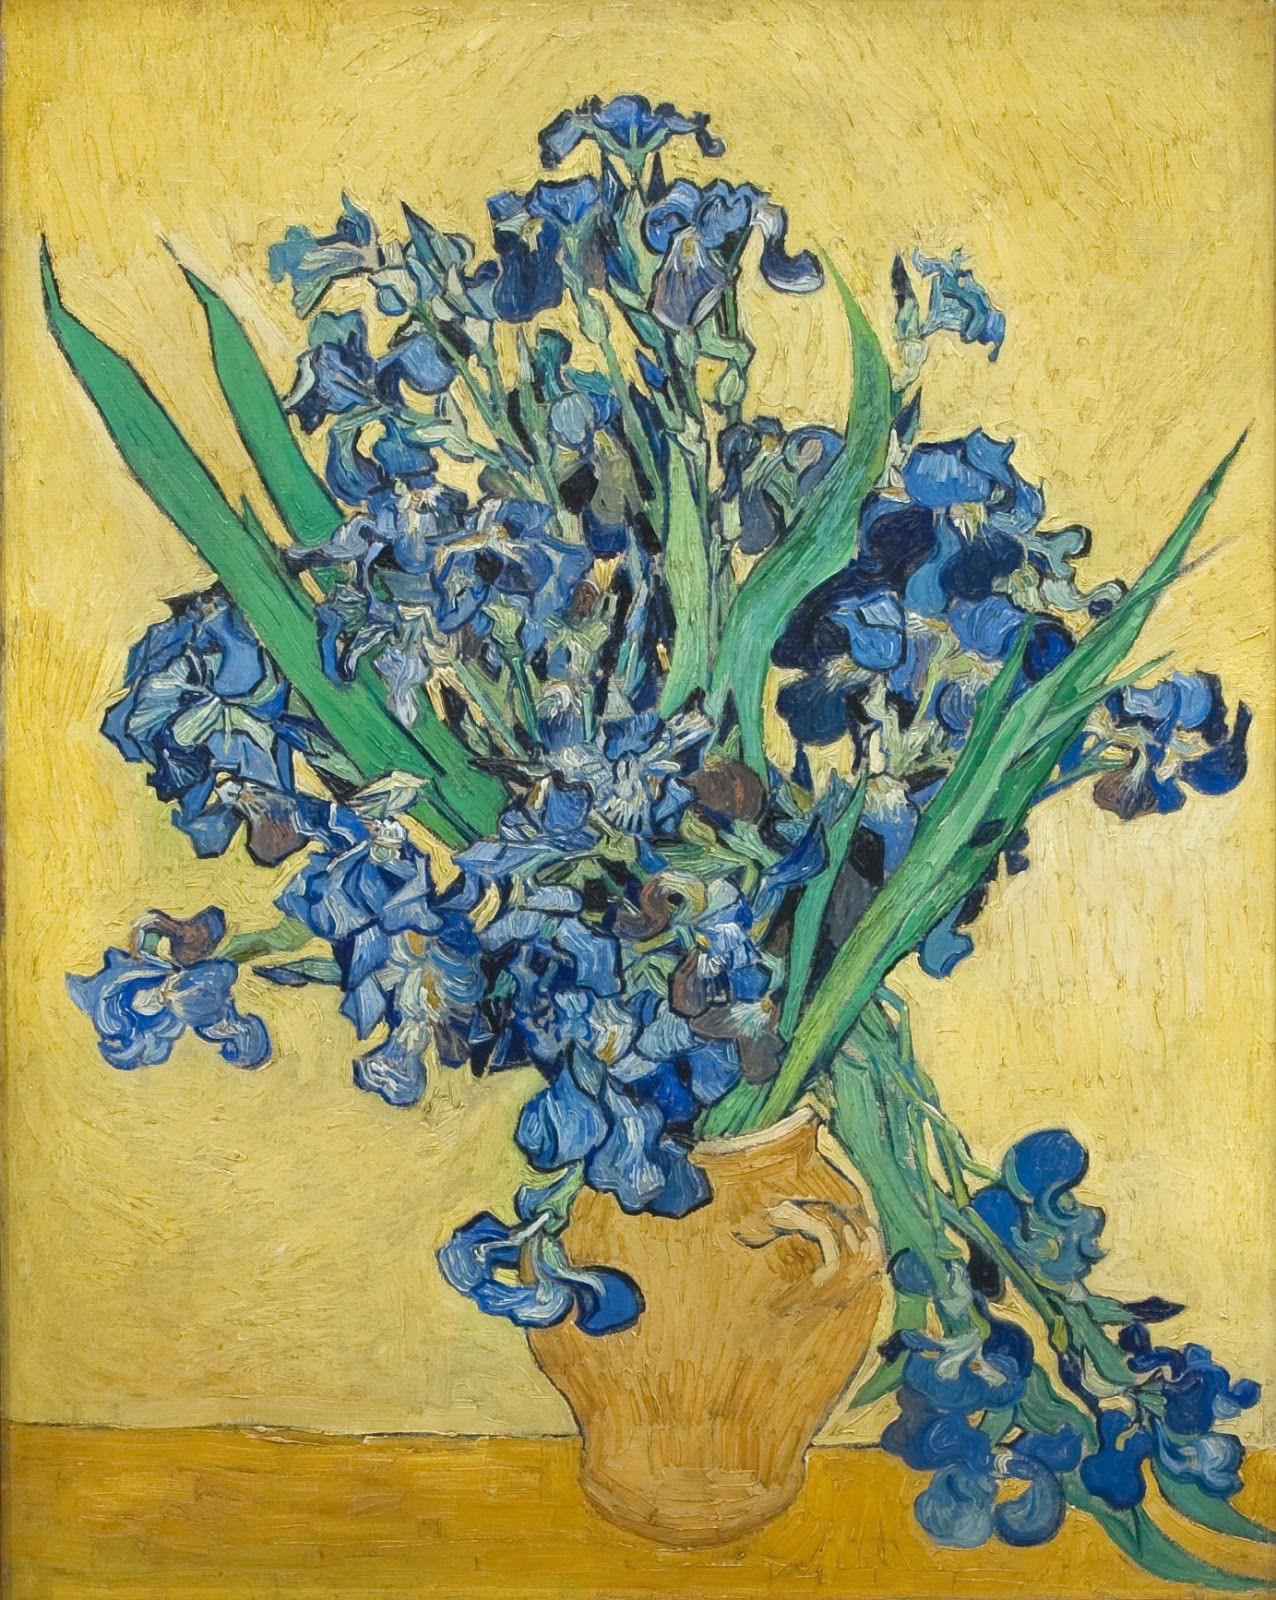 30 Fashionable Van Gogh Flowers In A Blue Vase 2024 free download van gogh flowers in a blue vase of vase with irises against a yellow background c 1890 by vincent van inside vase with irises against a yellow background c 1890 by vincent van gogh